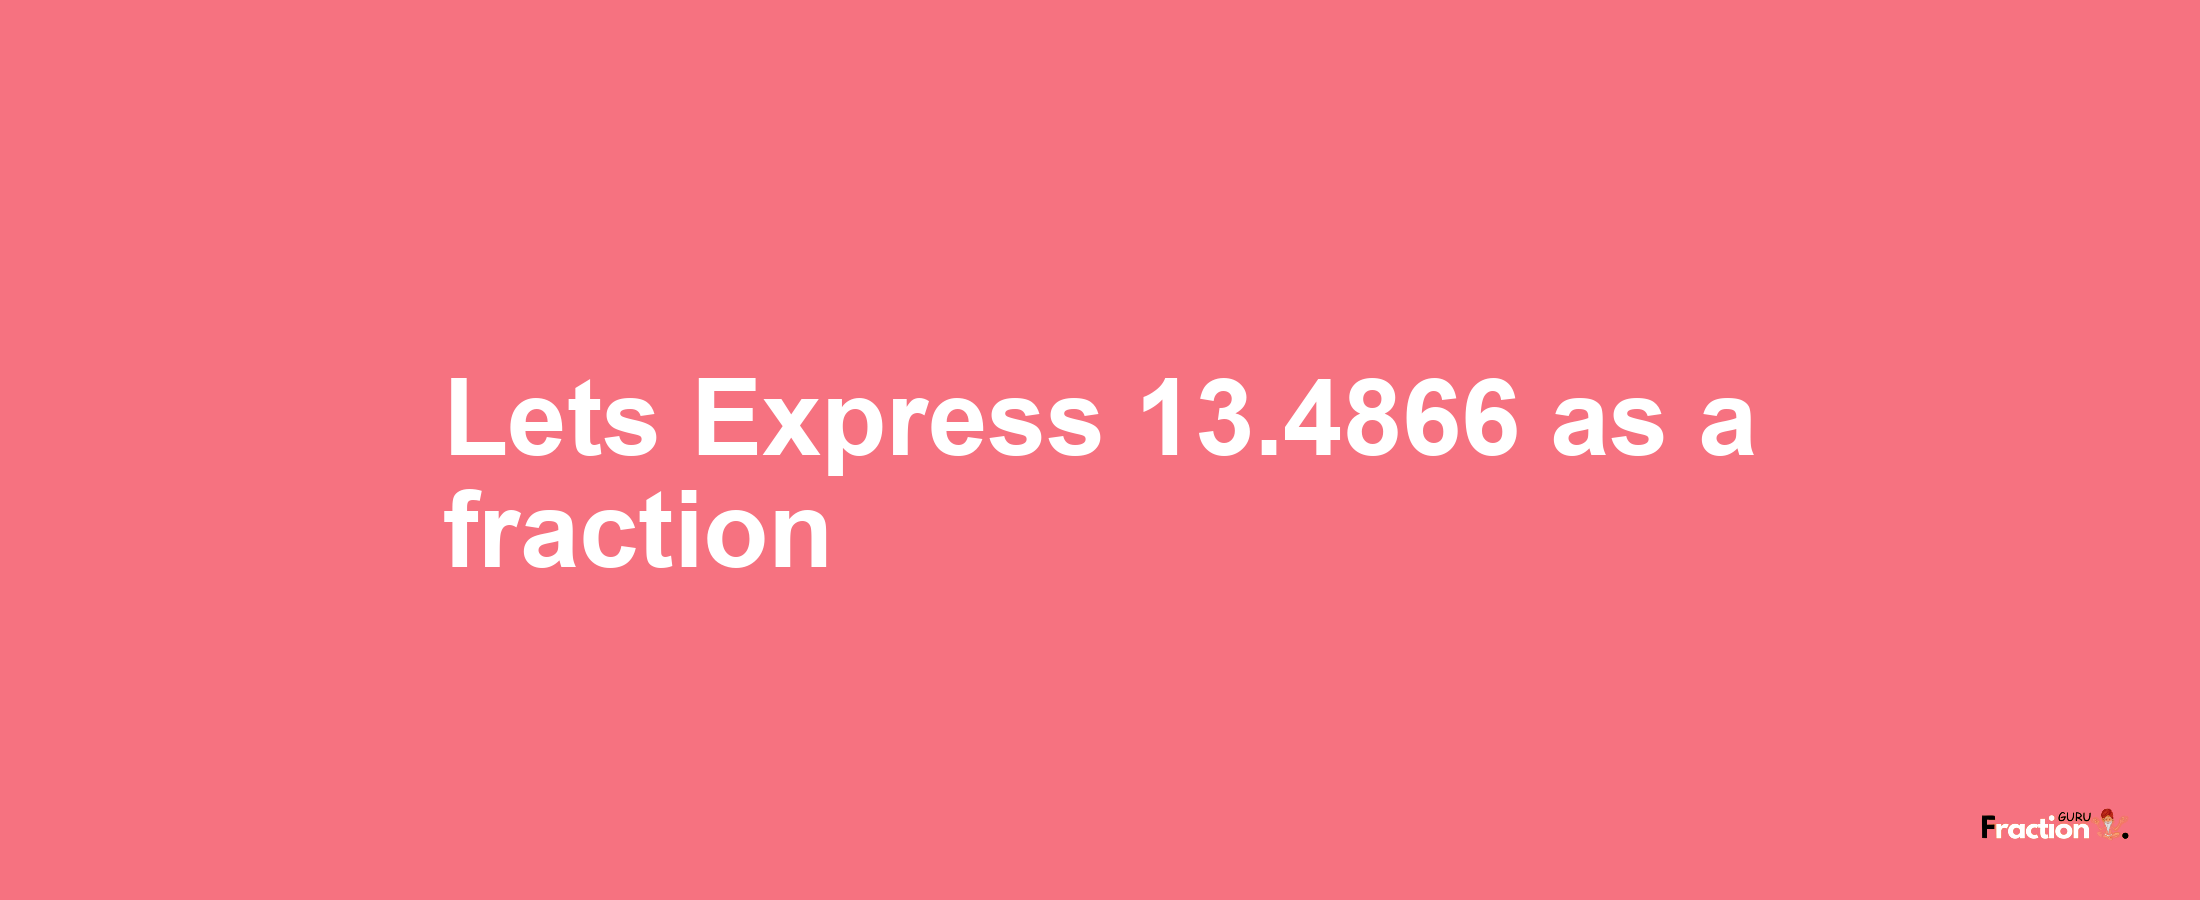 Lets Express 13.4866 as afraction